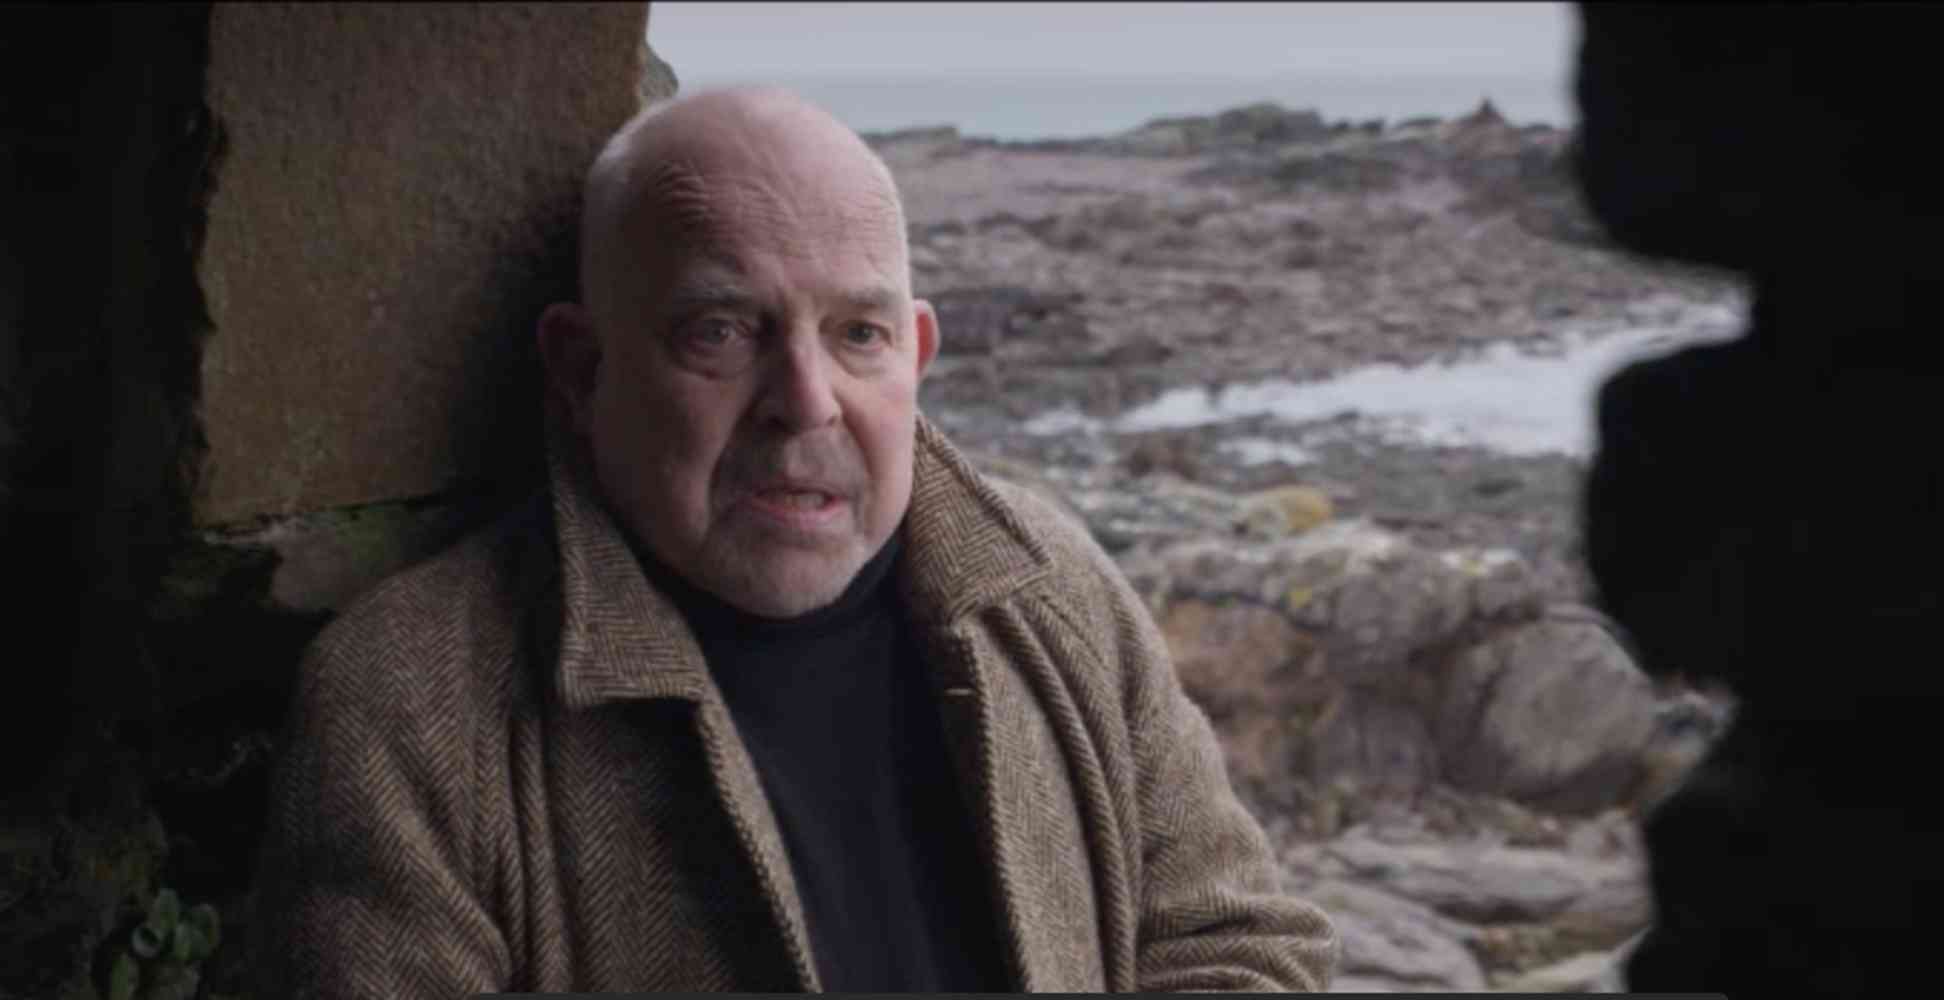 'Conscience and Murder':  Screen grab from drama doc exploring character and transference of text to action - John Shrapnel (UK) plays Claudius in the moment of confession: 'Philosopher's Hamlet'